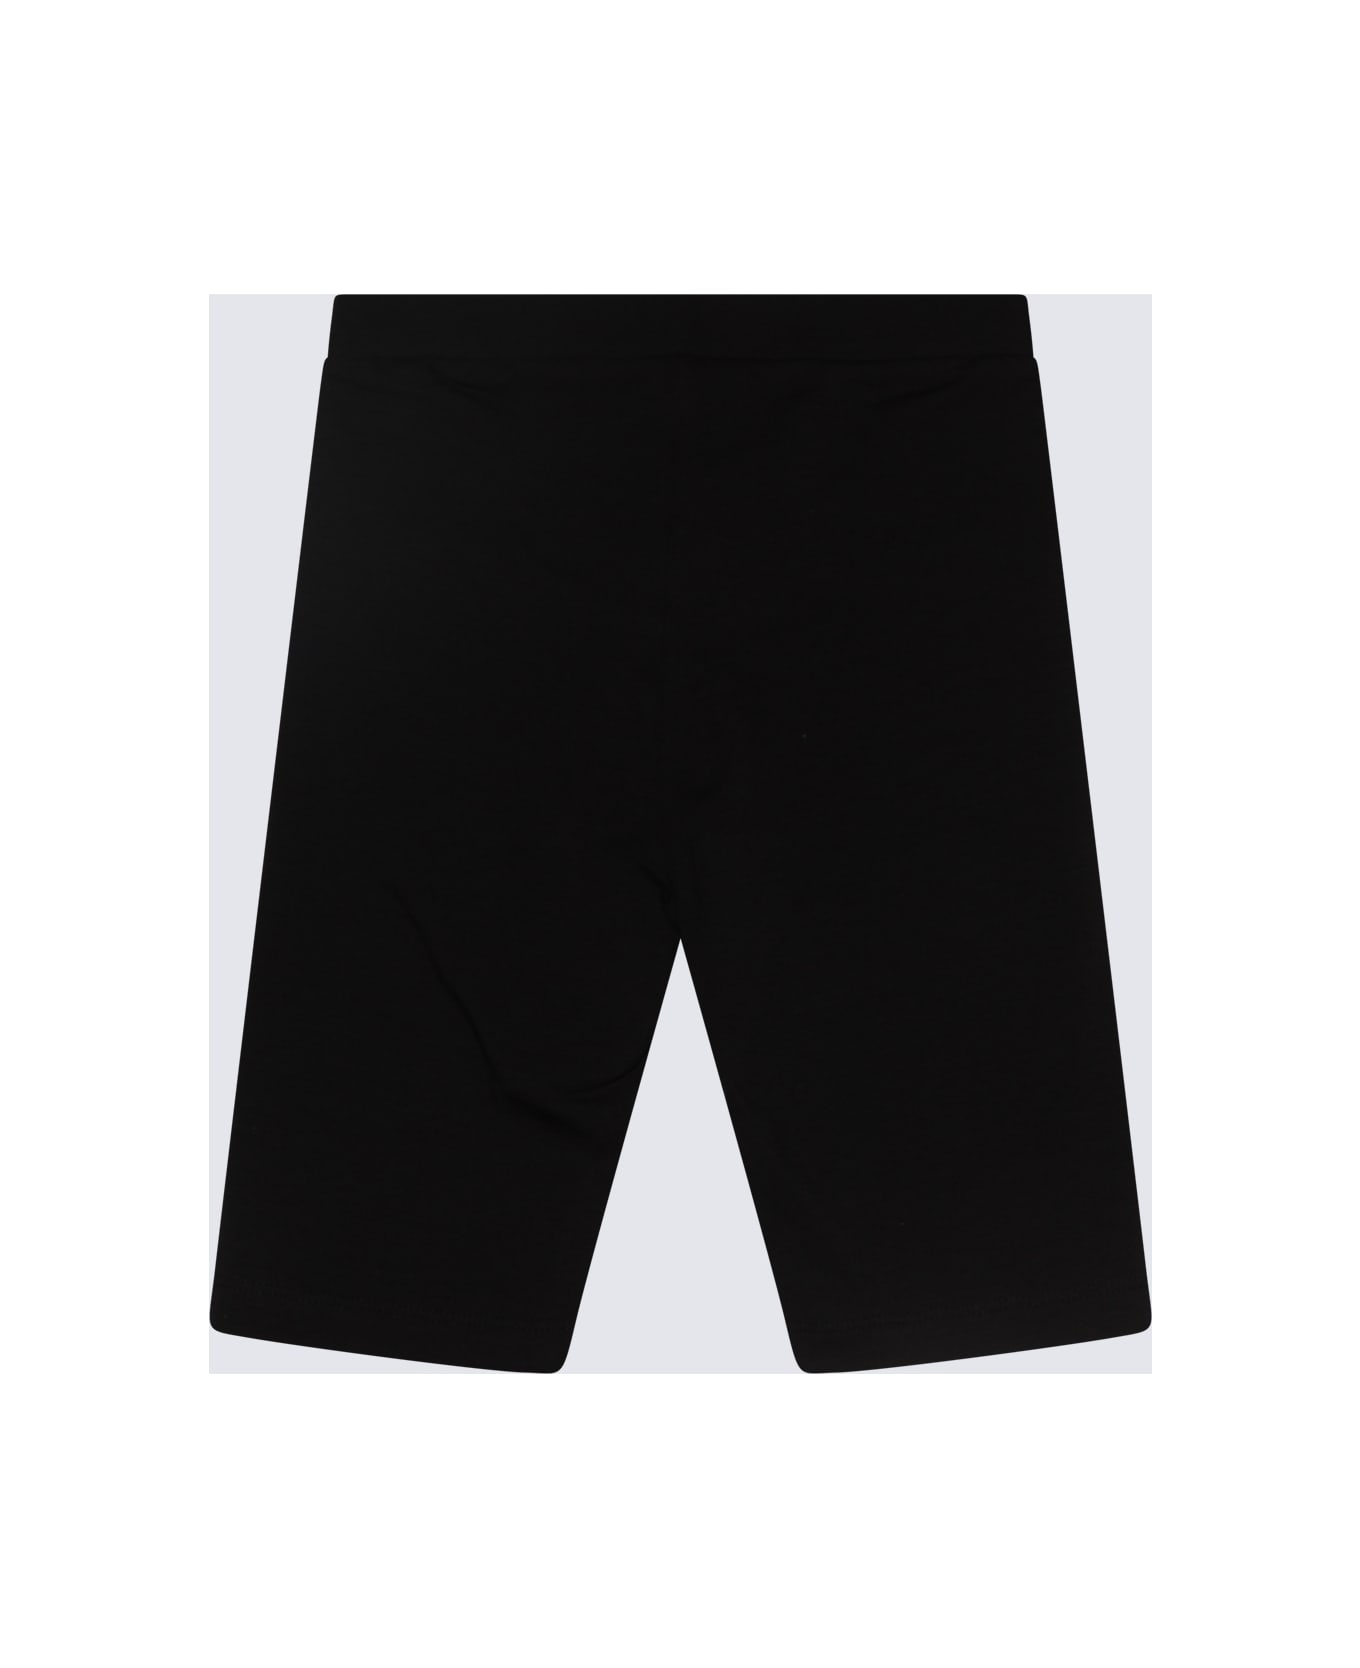 Moschino Black And White Cotton Blend Shorts